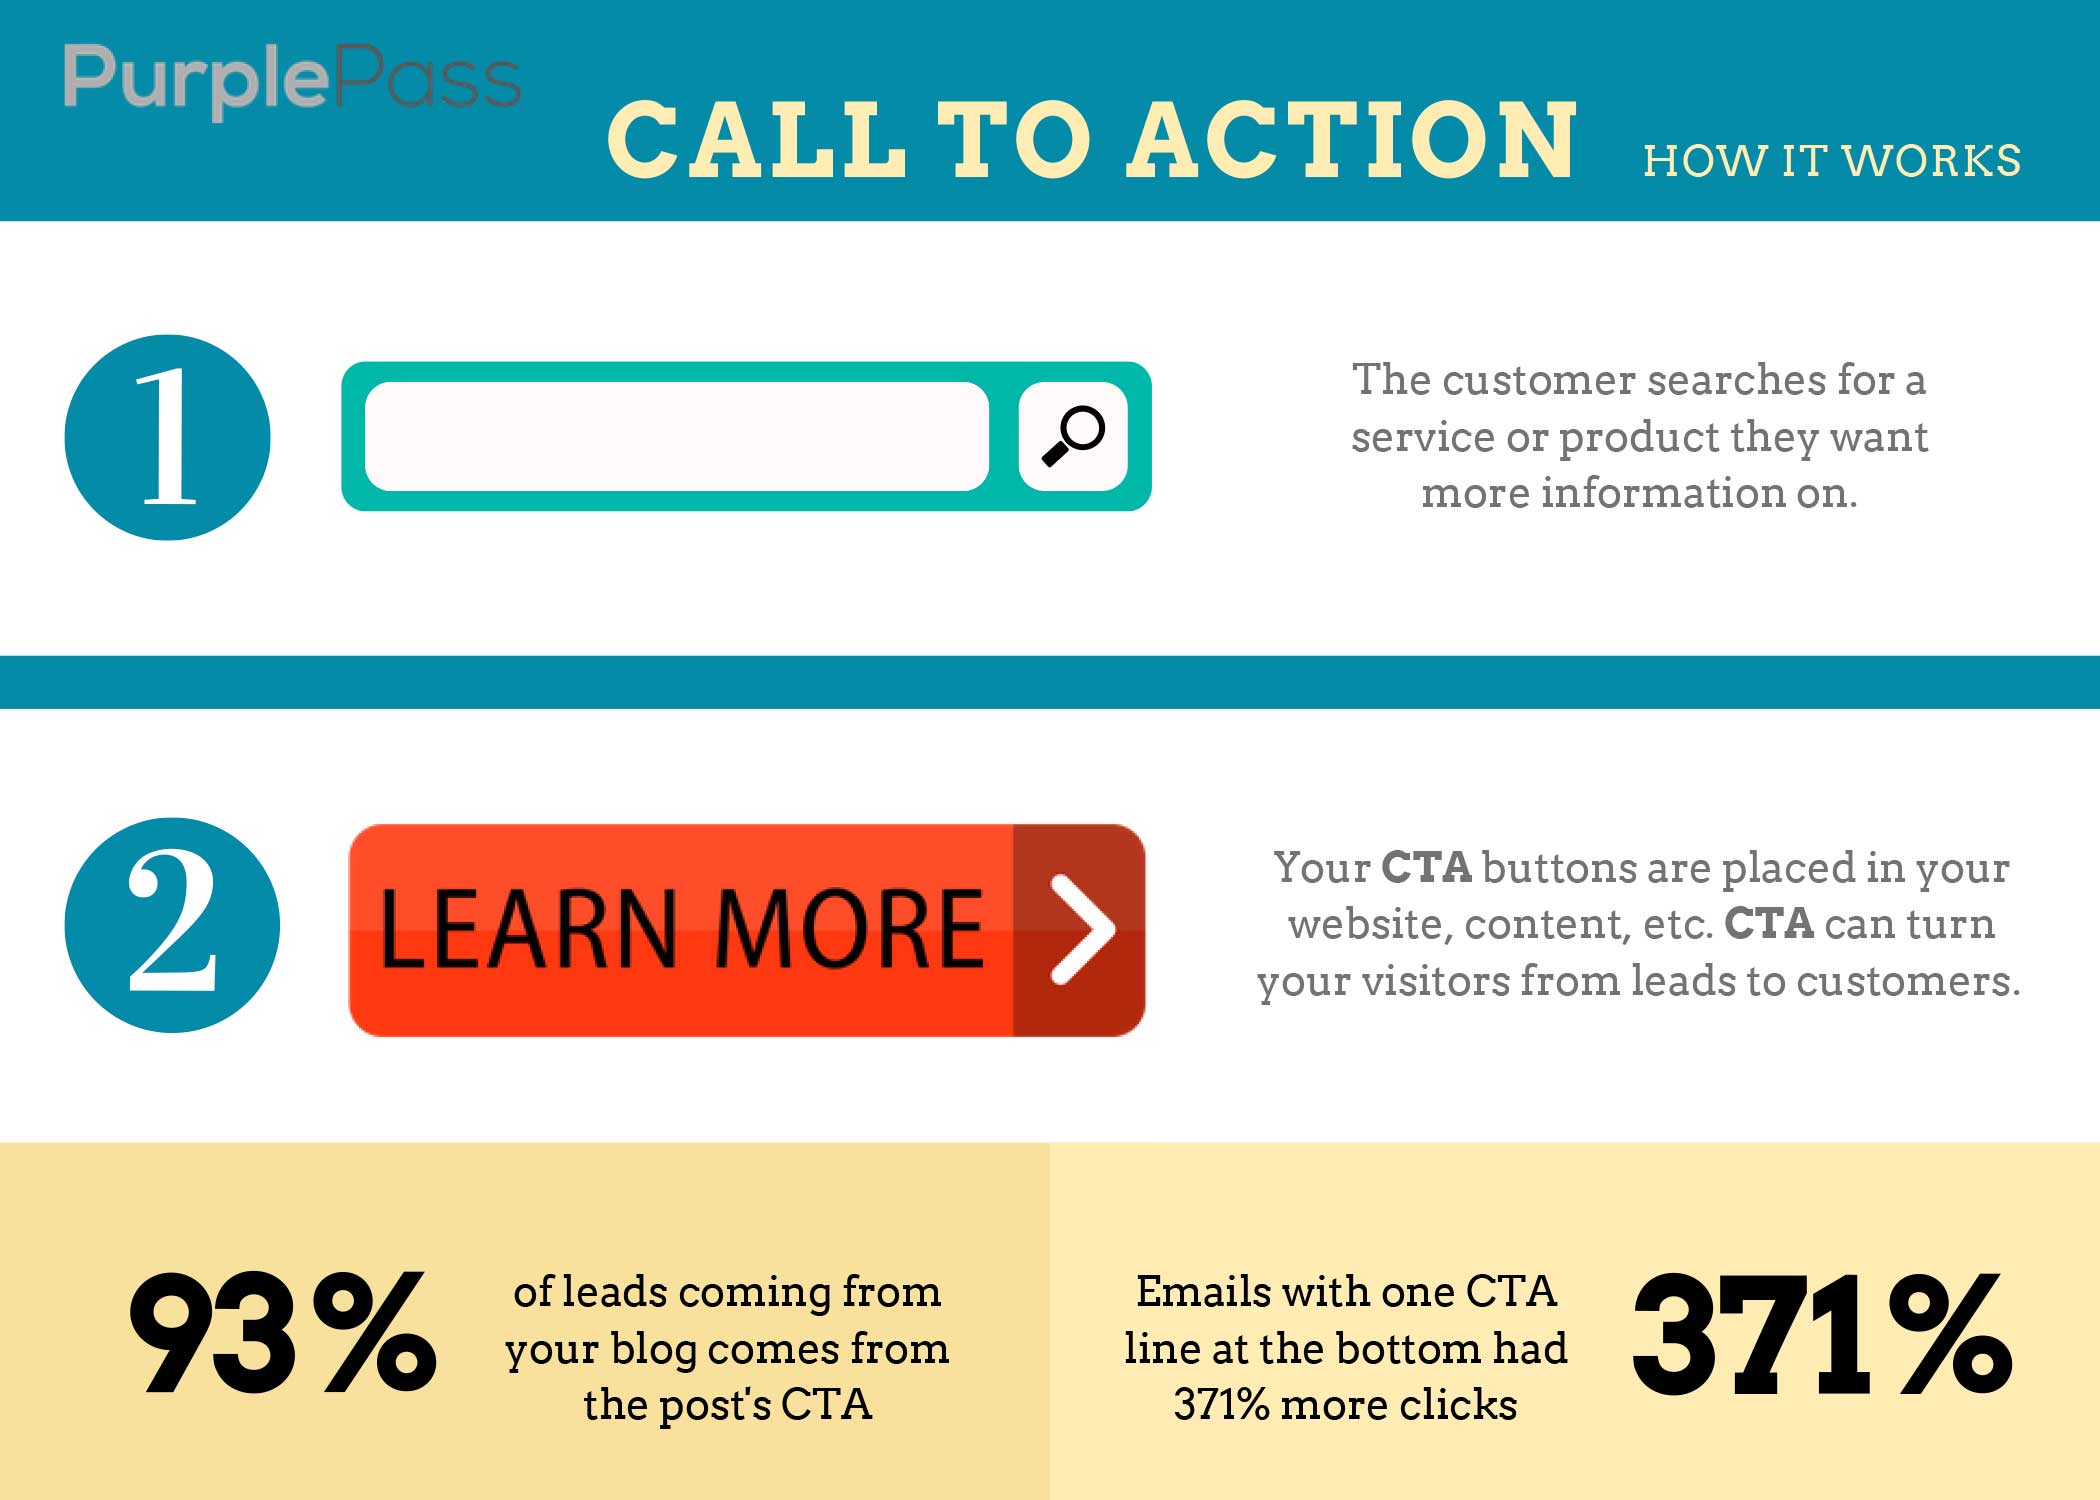 a sample for CTA or call to action and how it works